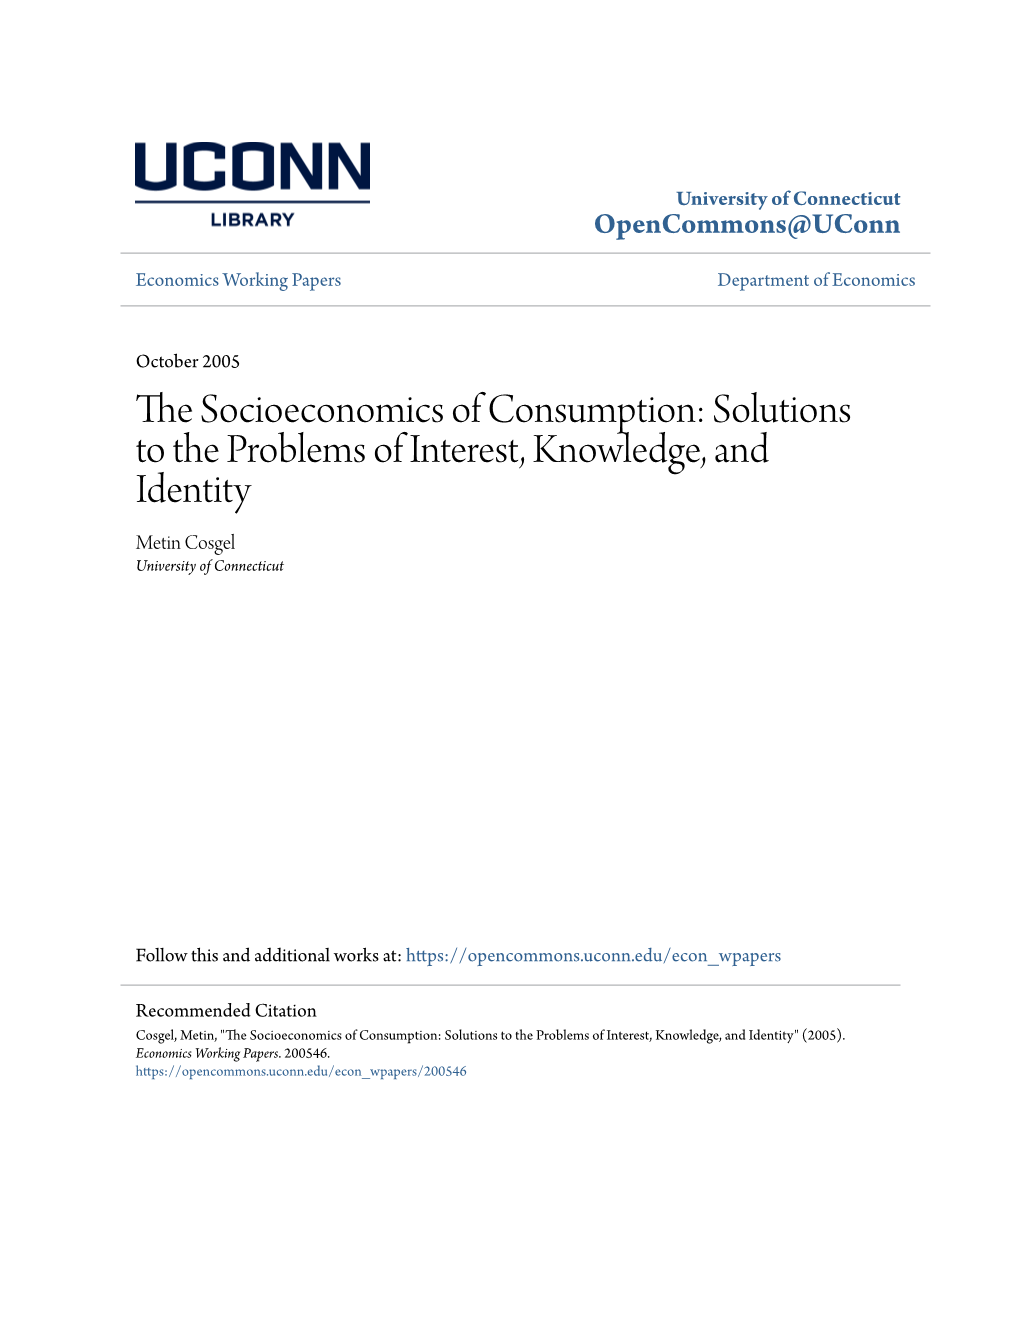 The Socioeconomics of Consumption: Solutions to the Problems of Interest, Knowledge, and Identity Metin Cos¸Gel University of Connecticut